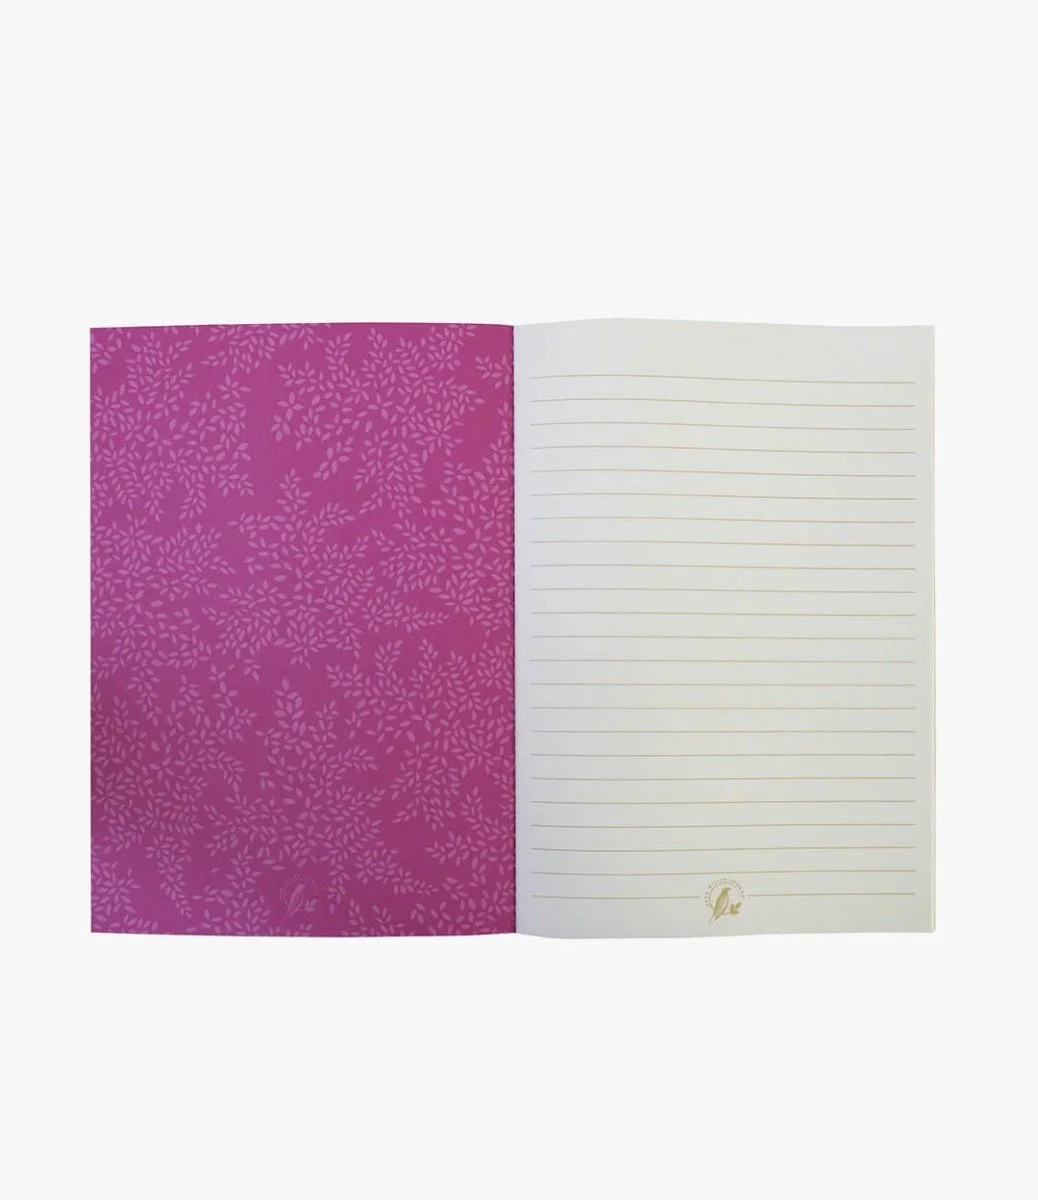 Set Of 2 - A5 Stitched Spine Notebooks by Sara Miller